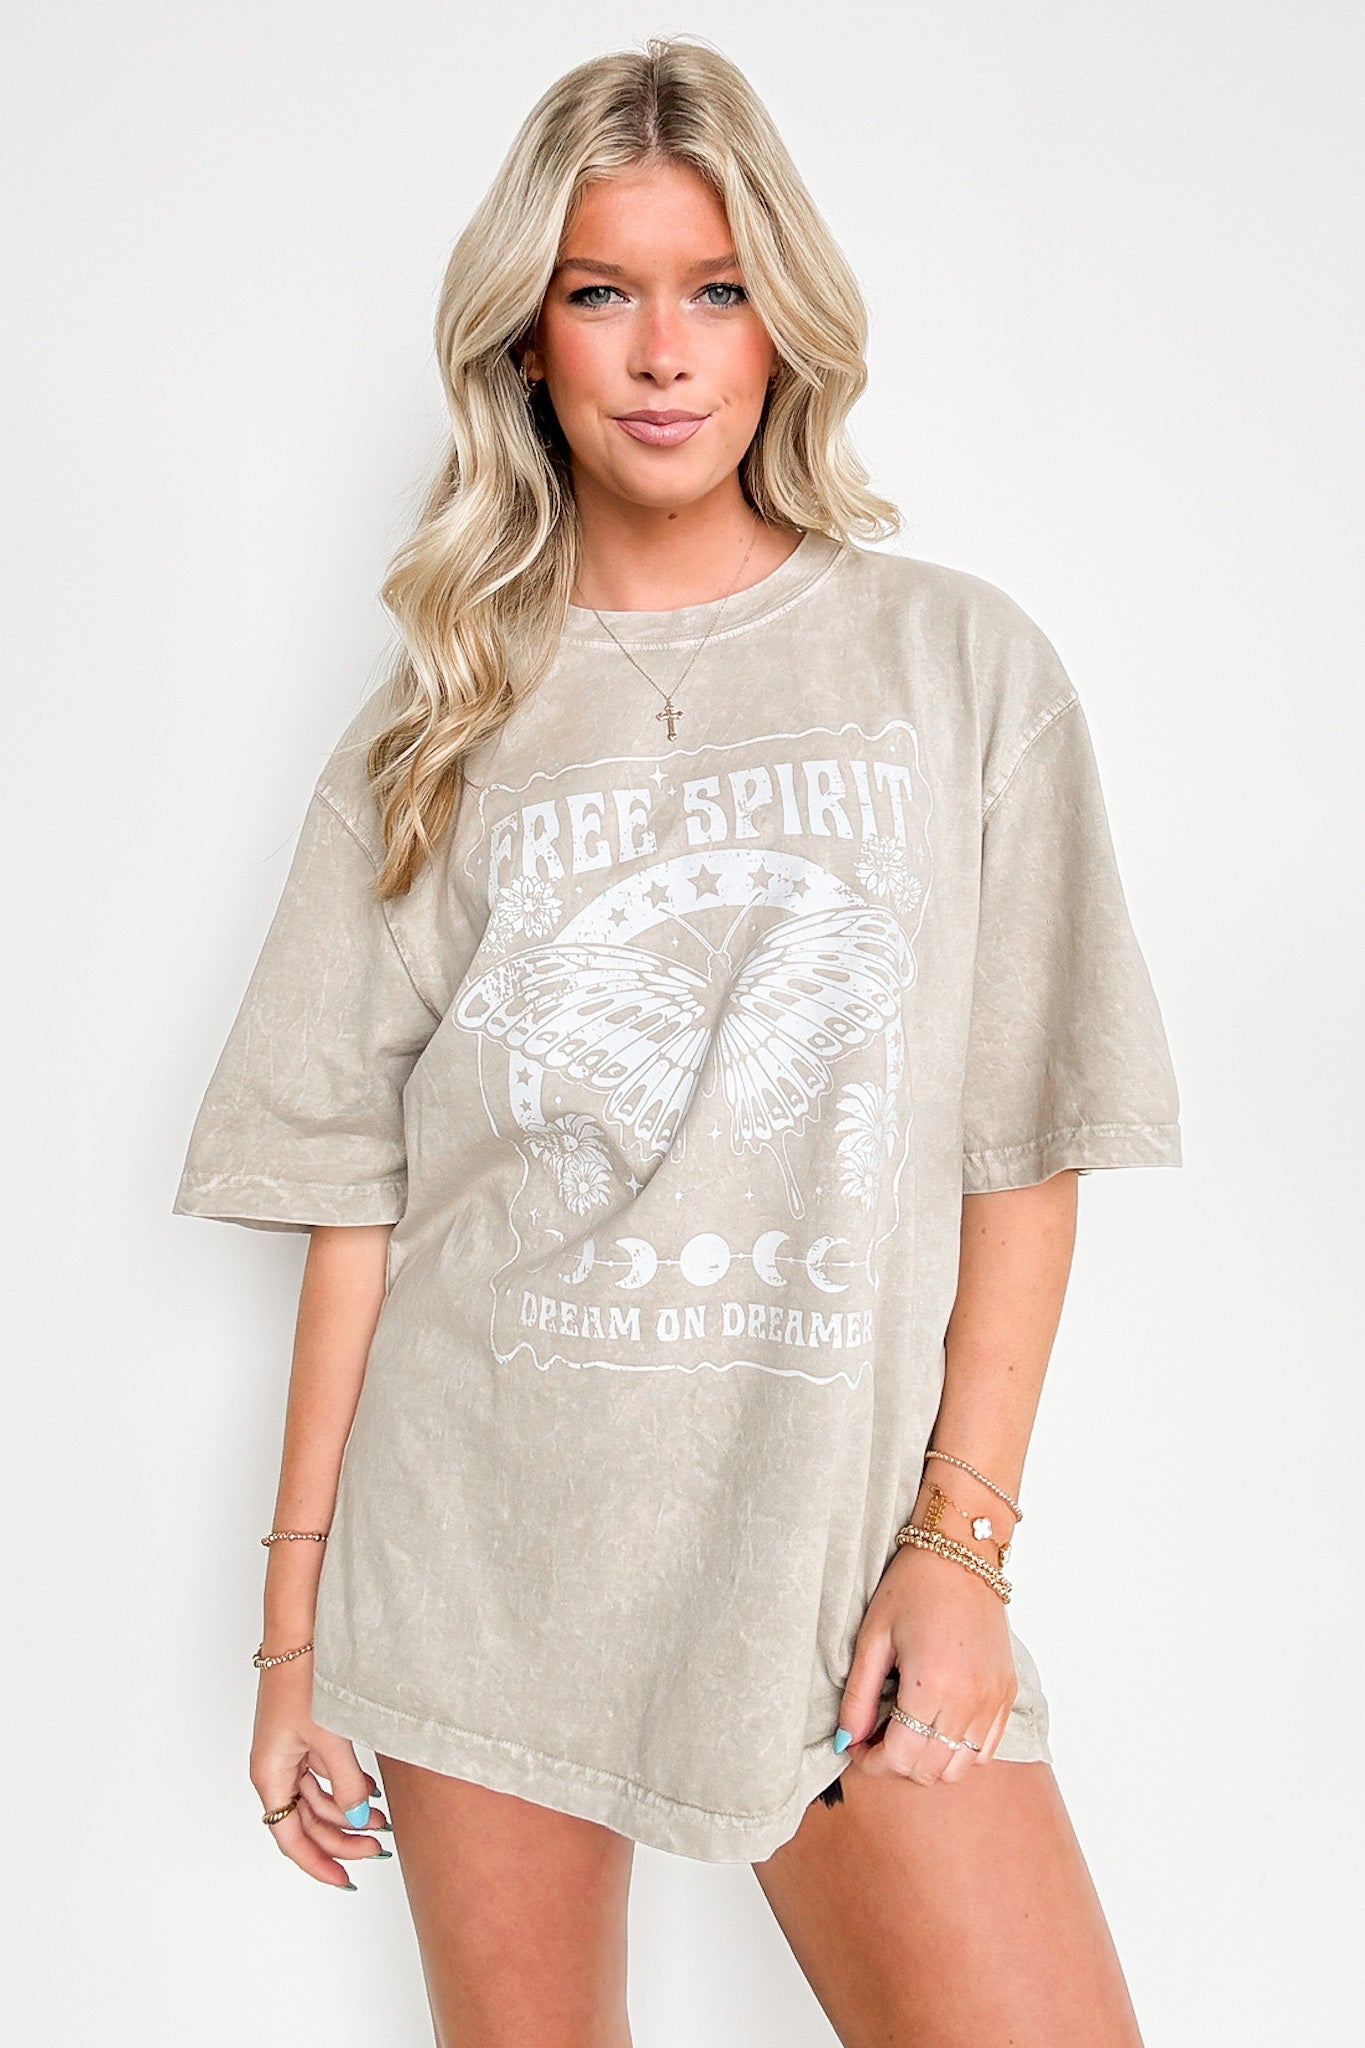 SM / Vintage Stone Free Spirit - Dream on Dreamer Vintage Graphic Tee - Madison and Mallory